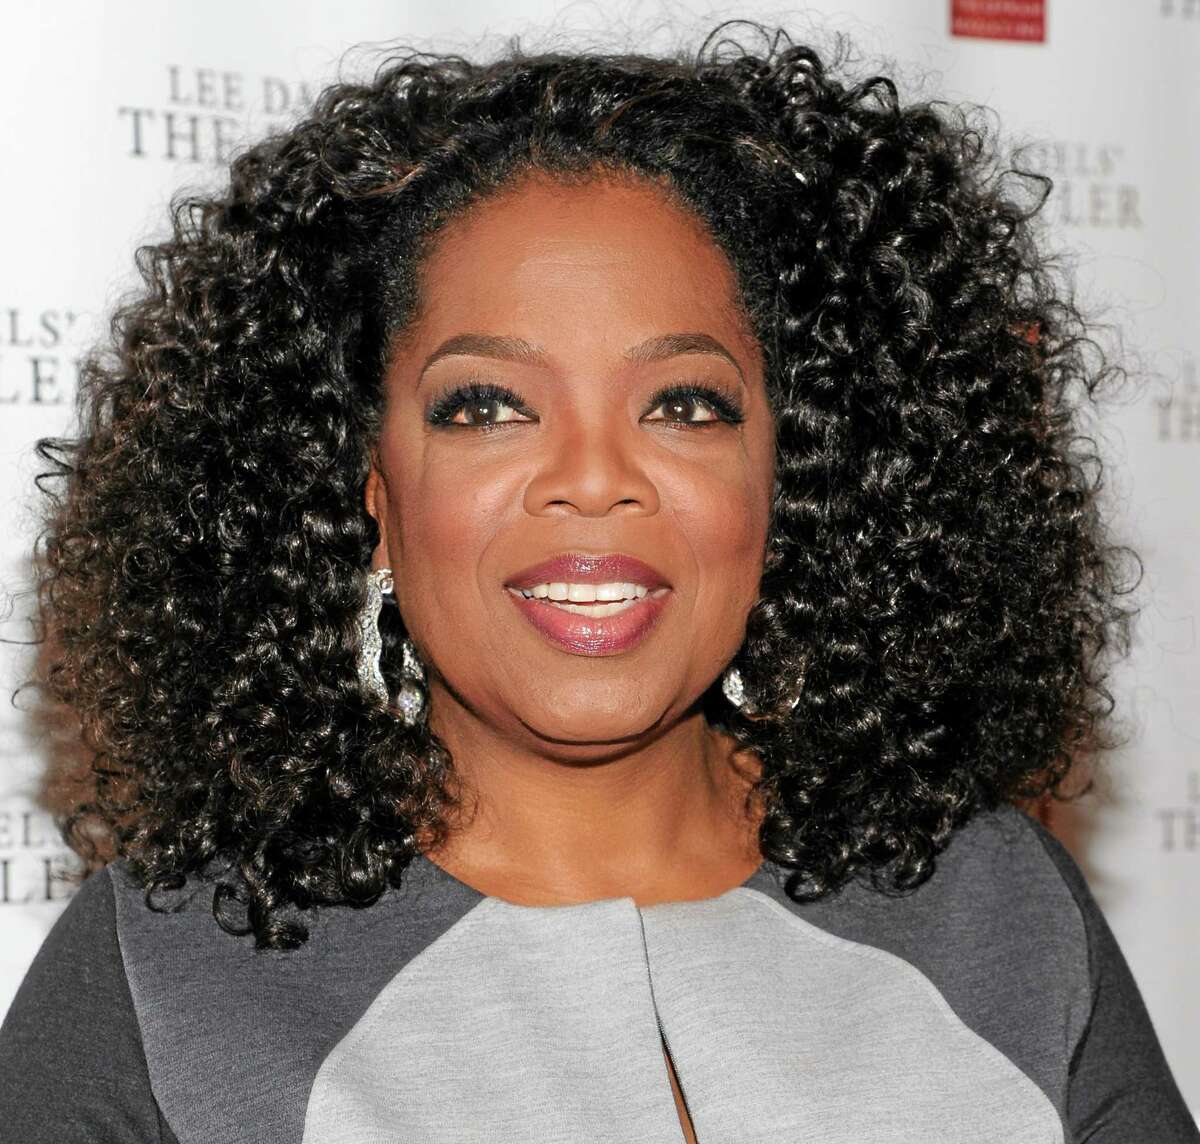 FILE - In this July 31, 2013 file photo, media mogul and actress Oprah Winfrey attends a special screening of "Lee Daniels' The Butler" hosted by O, The Oprah Magazine, at Hearst Tower, in New York. Oprah's OWN channel is in the black for the first time since its rocky start two-and-a-half years ago. More than 30 new advertisers are joining original heavyweight sponsors Procter & Gamble and General Electric, and are paying higher rates as the channel has found its programming and distribution footing. (Photo by Evan Agostini/Invision/AP, File)